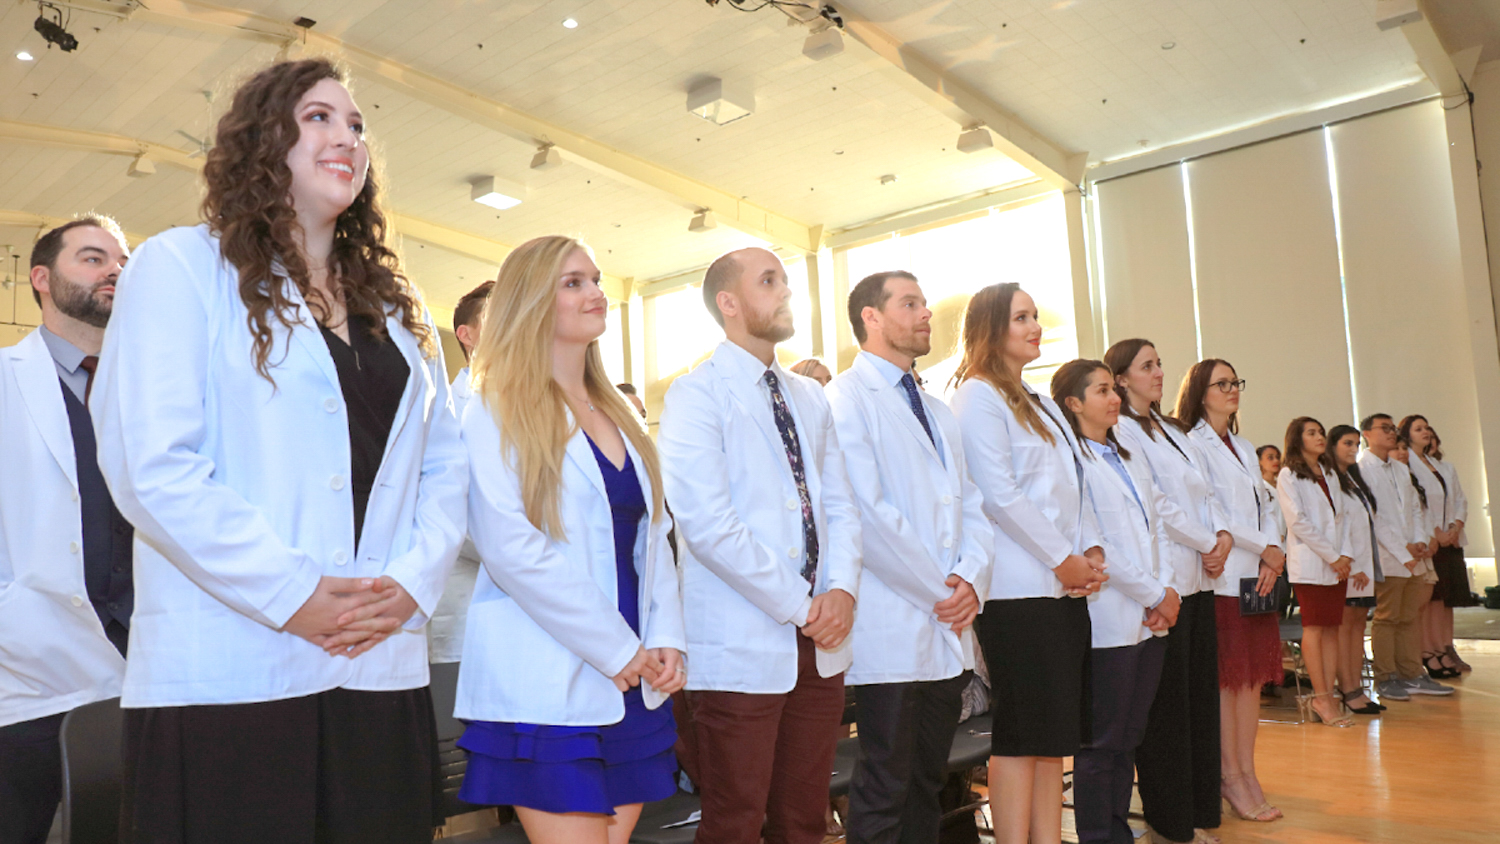 CSU Monterey Bay students in their white coats during the White Coat Ceremony